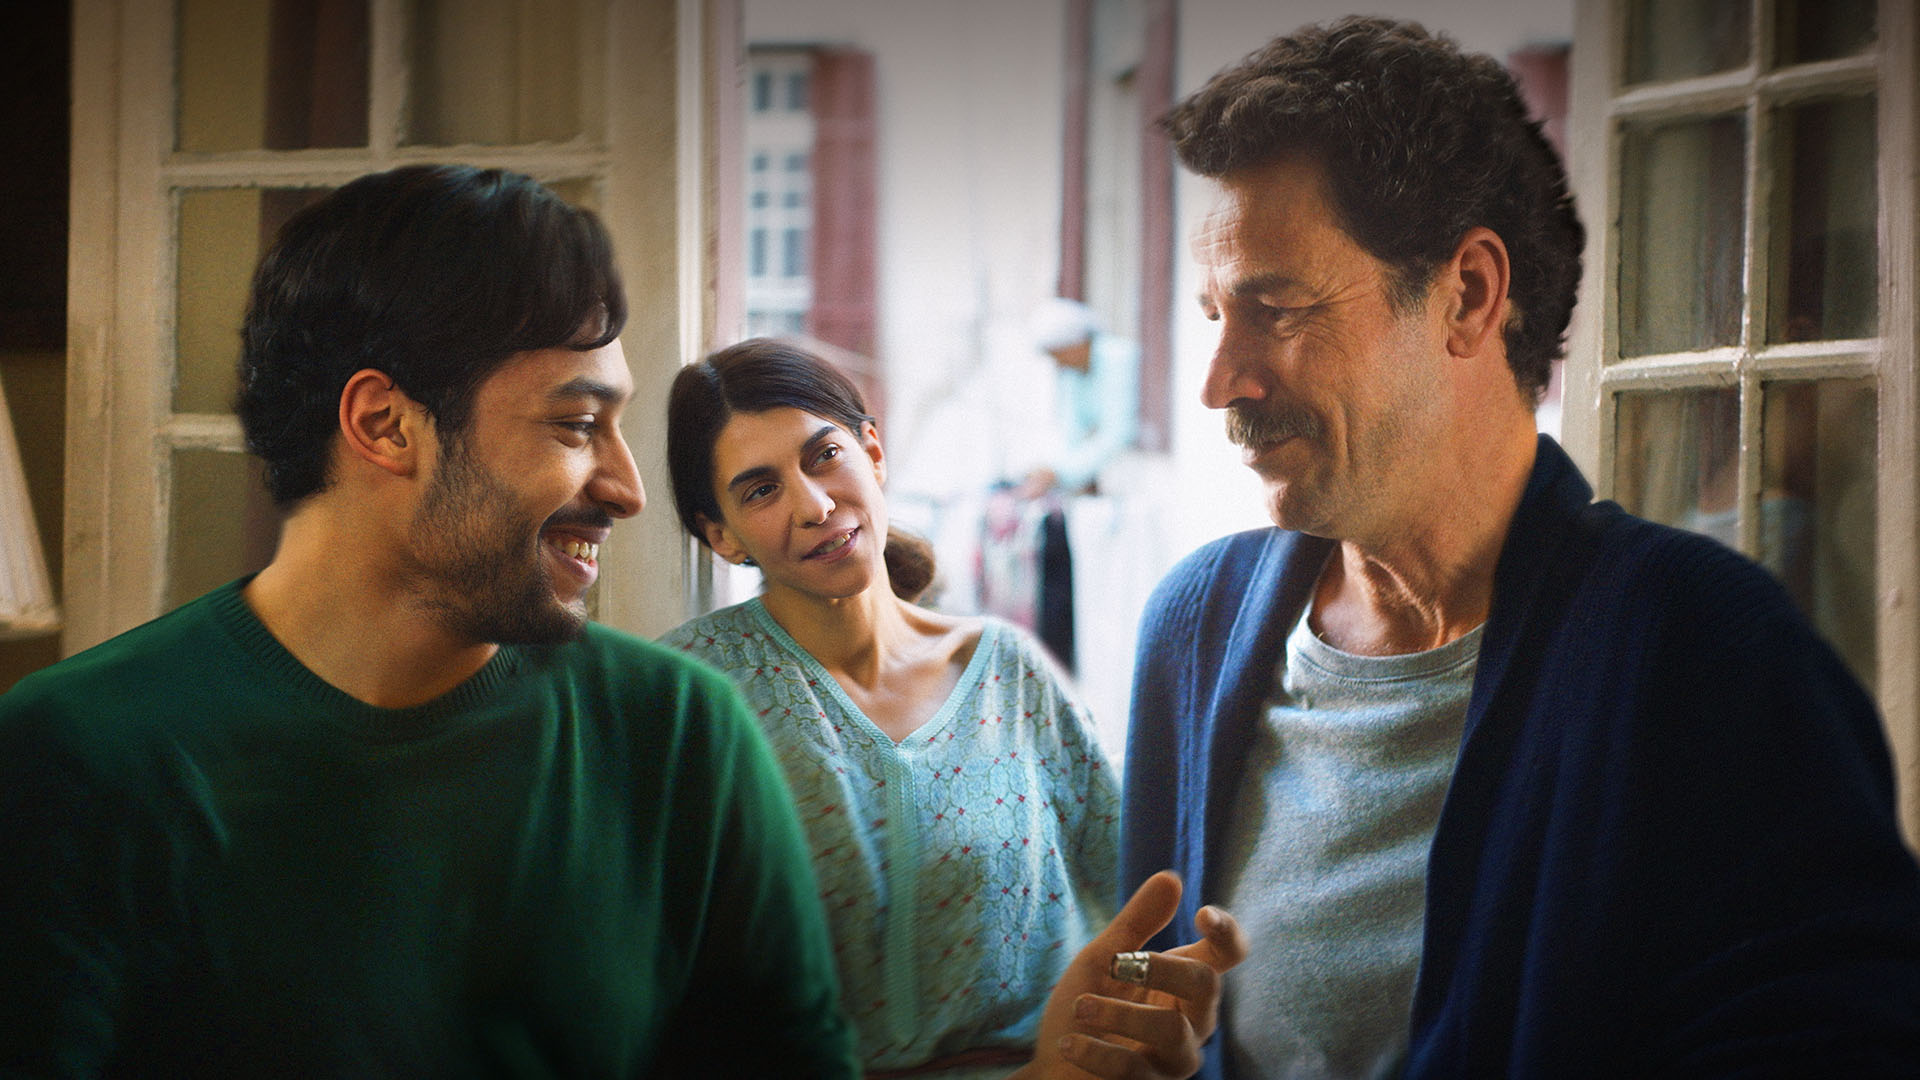 The Blue Caftan movie review: love triangle's tragic tone lingers ...